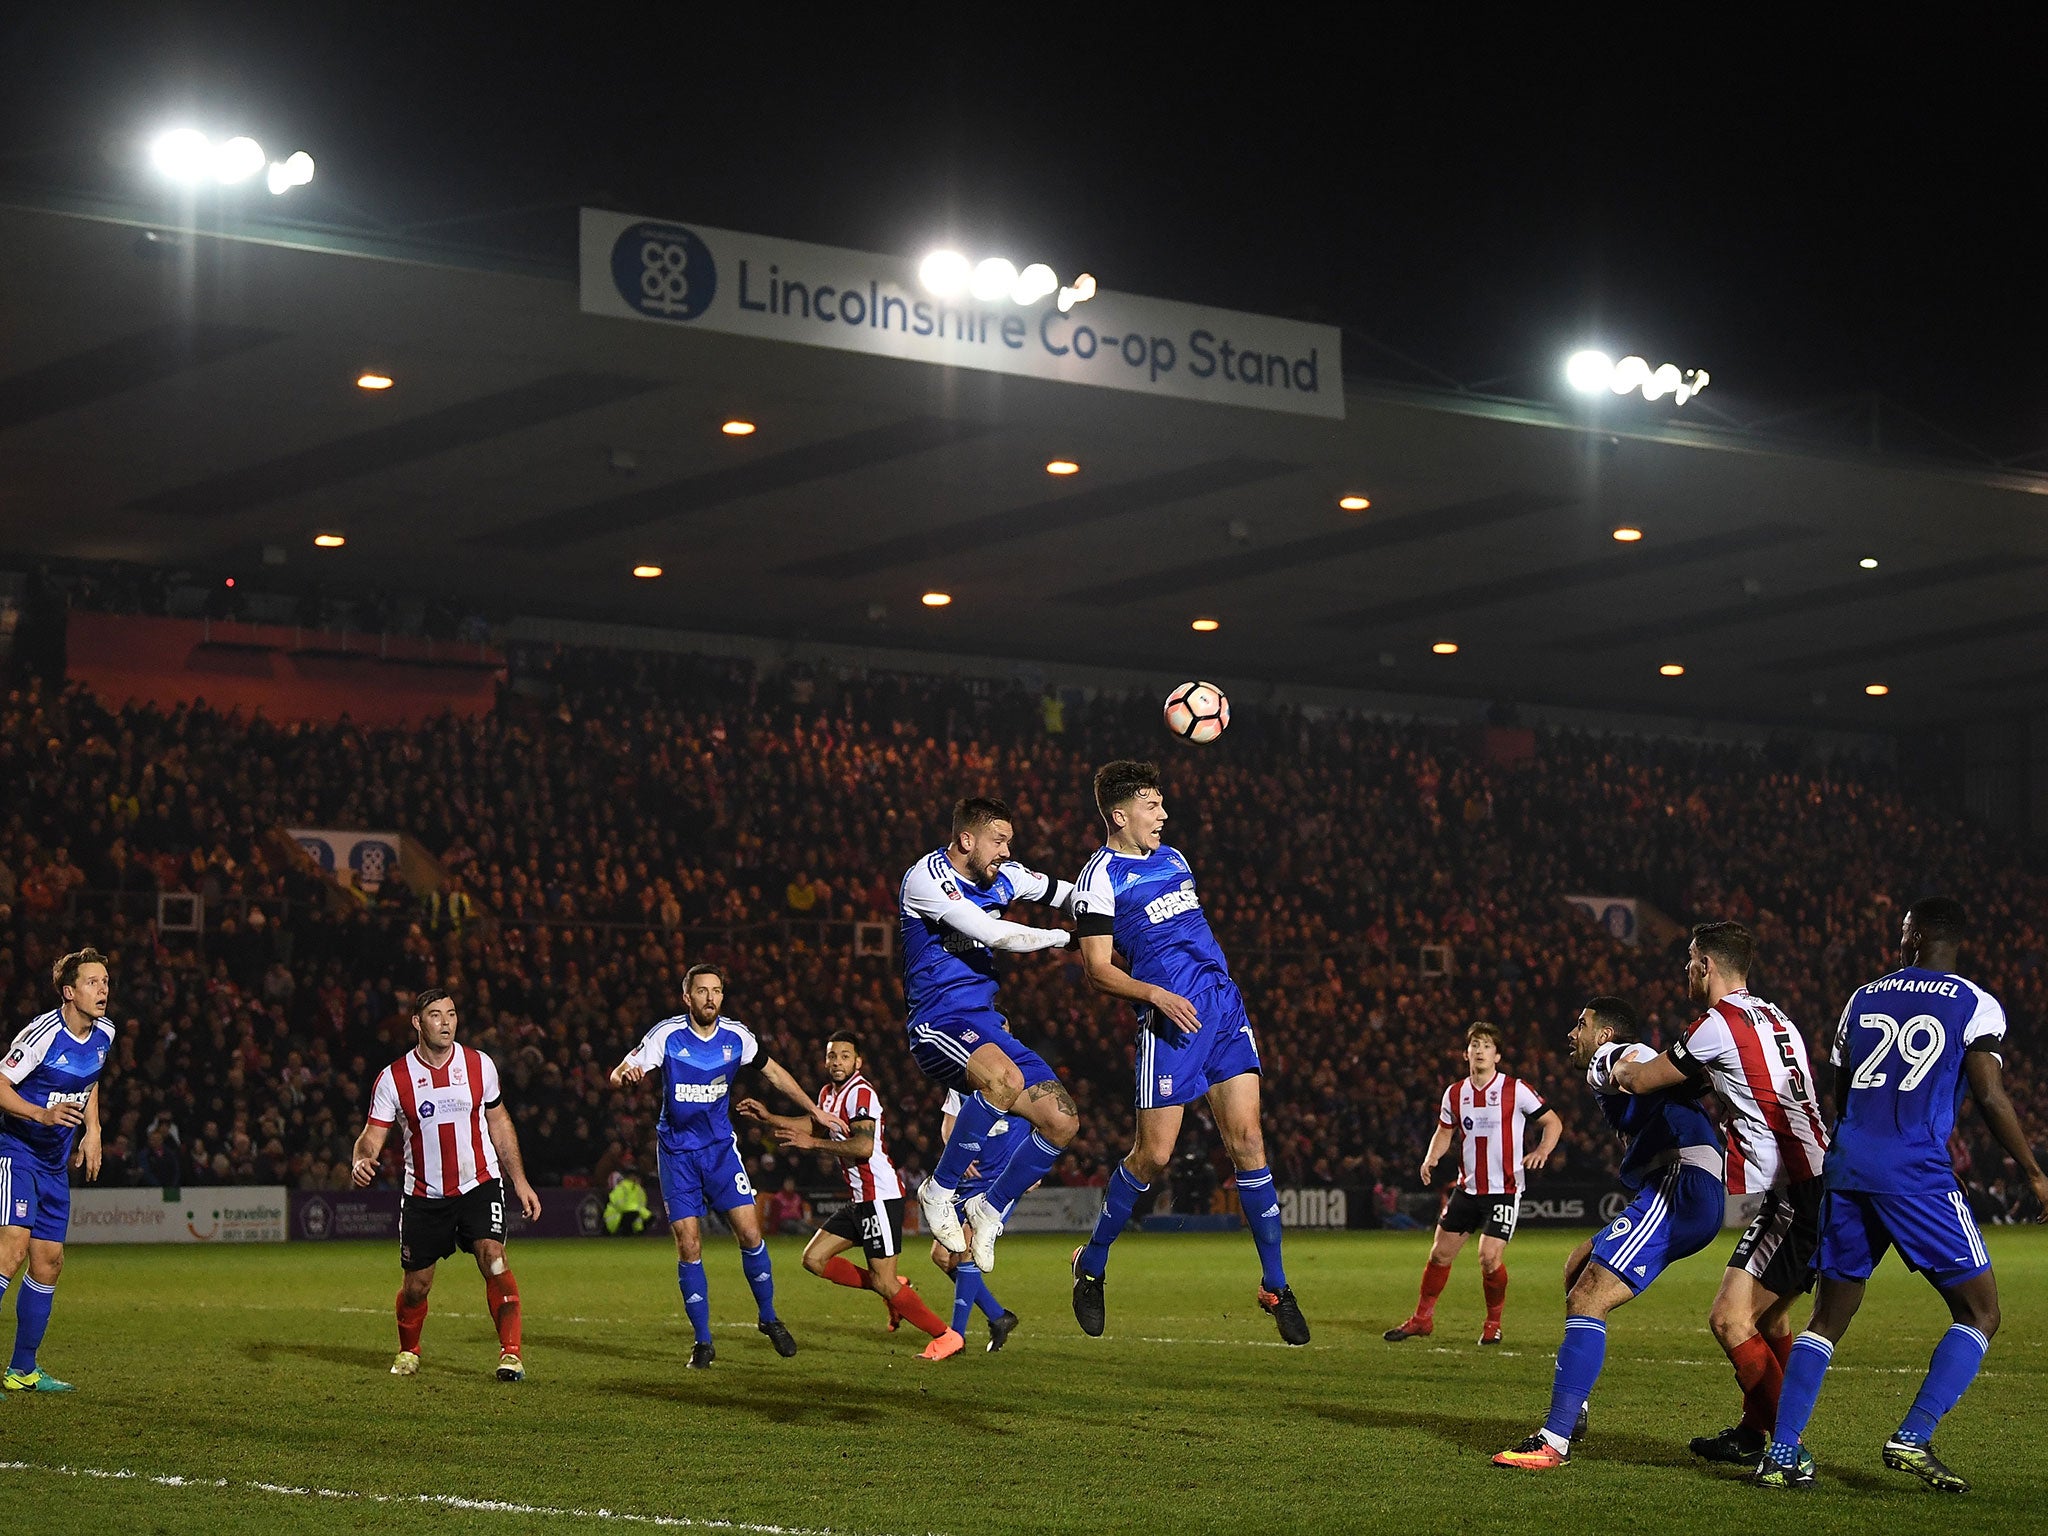 Lincoln in action against Ipswich Town during their FA Cup third round replay at the Sincil Bank Stadium